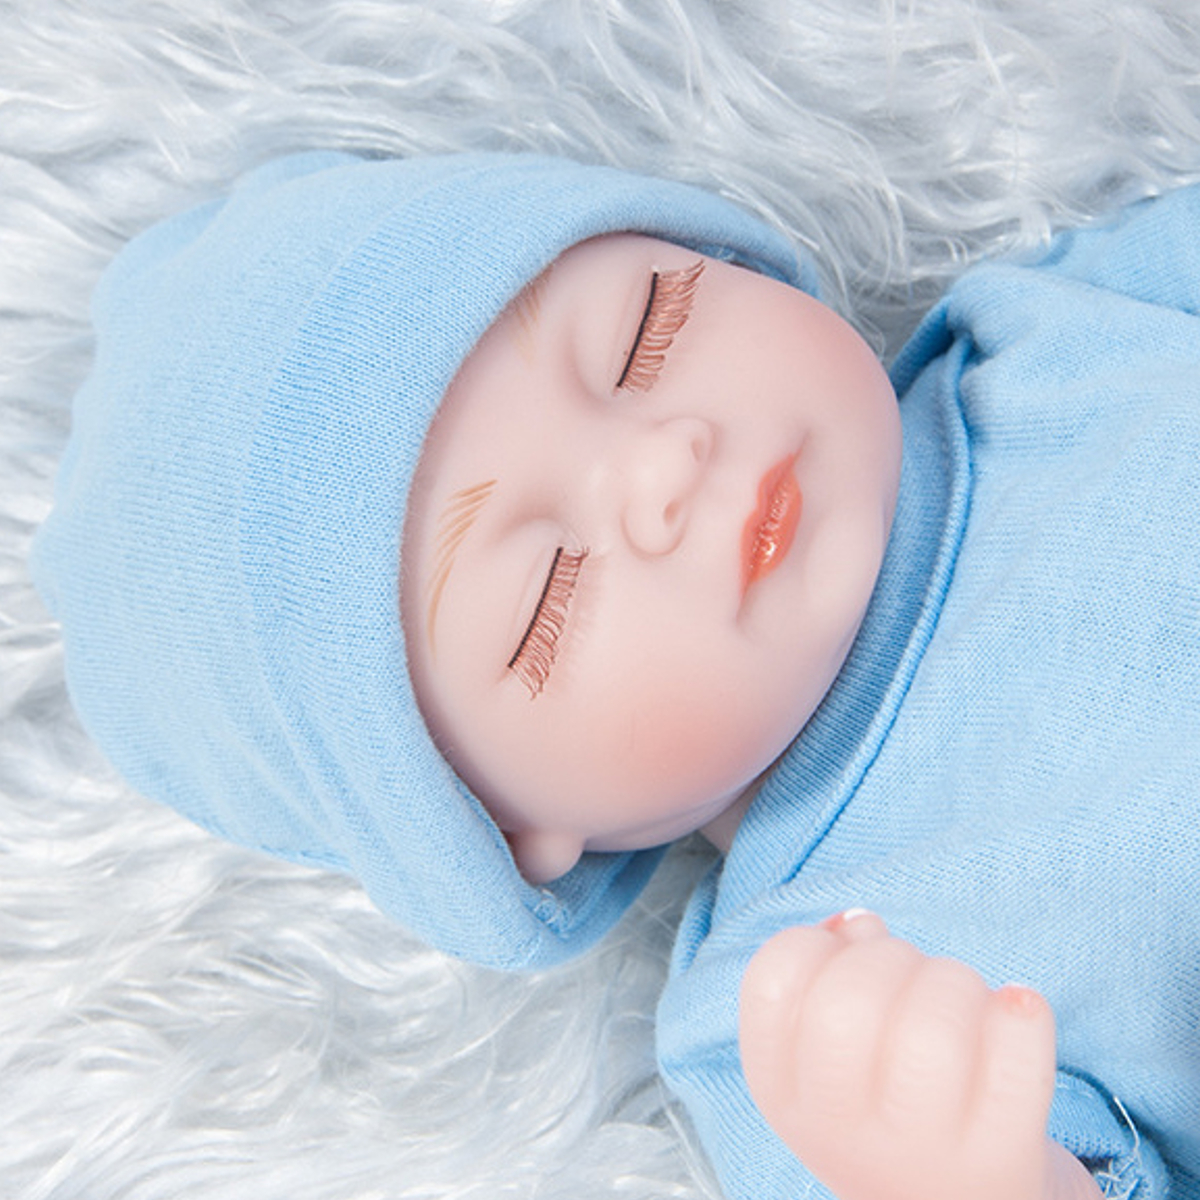 28CM-Soft-Silicone-Realistic-Sleeping-Reborns-Lifelikes-Newborns-Baby-Doll-Toy-with-Moveable-Head-Ar-1891375-8